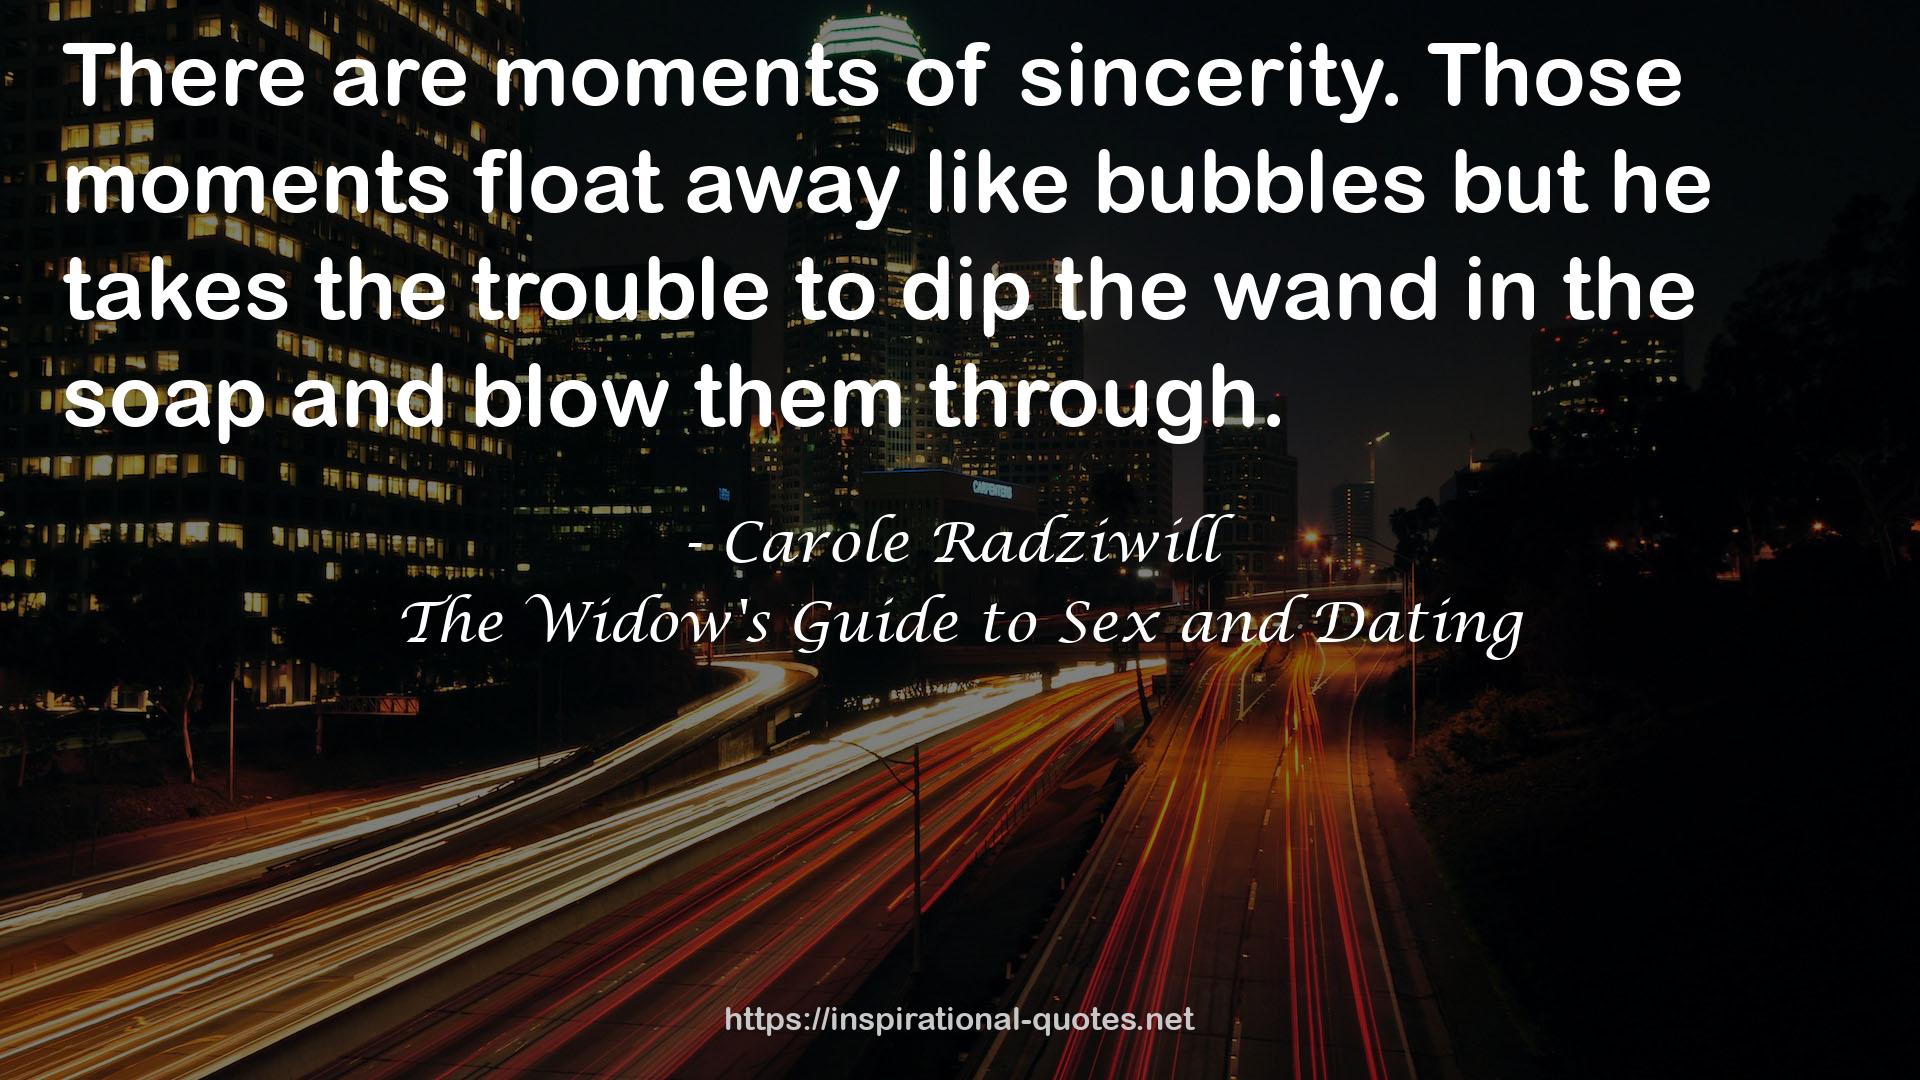 The Widow's Guide to Sex and Dating QUOTES